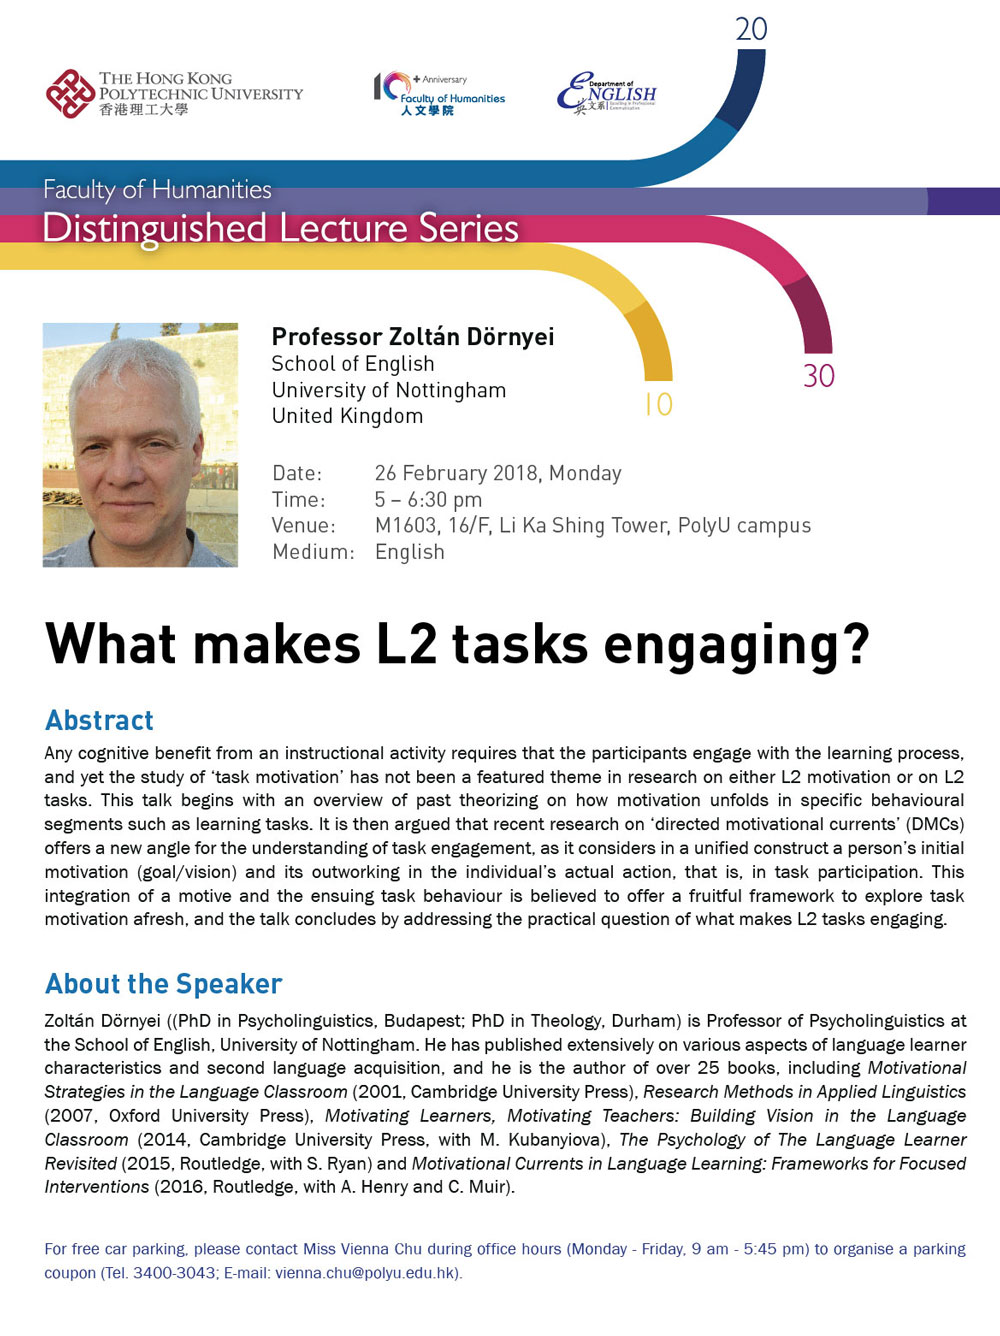 What makes L2 tasks engaging?